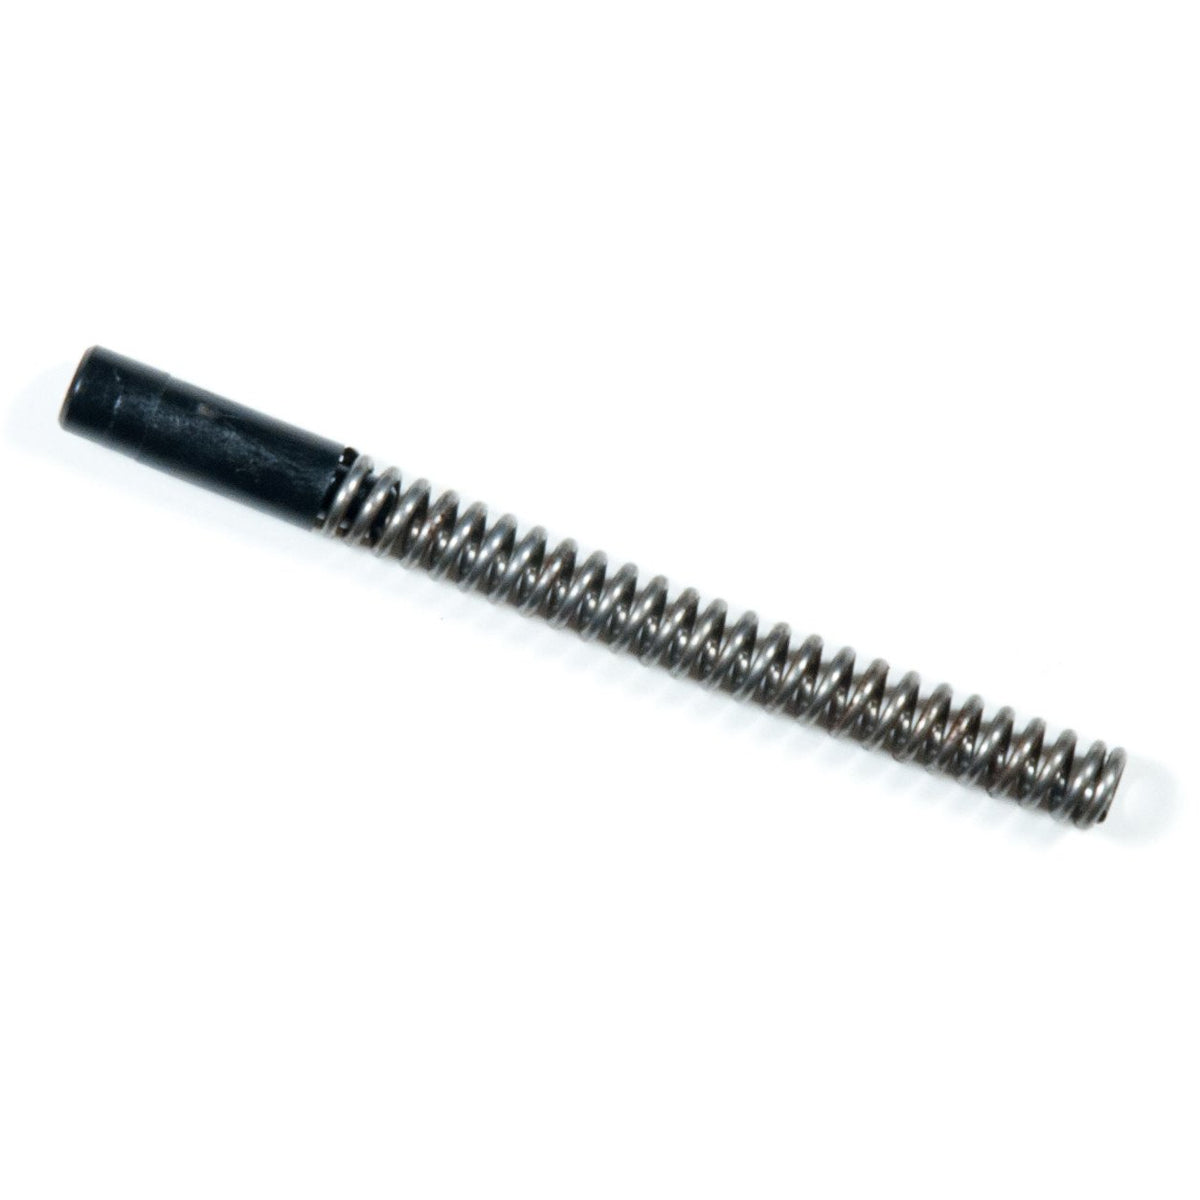 Daisy Legacy Rimfire Firing Pin Spring Complete